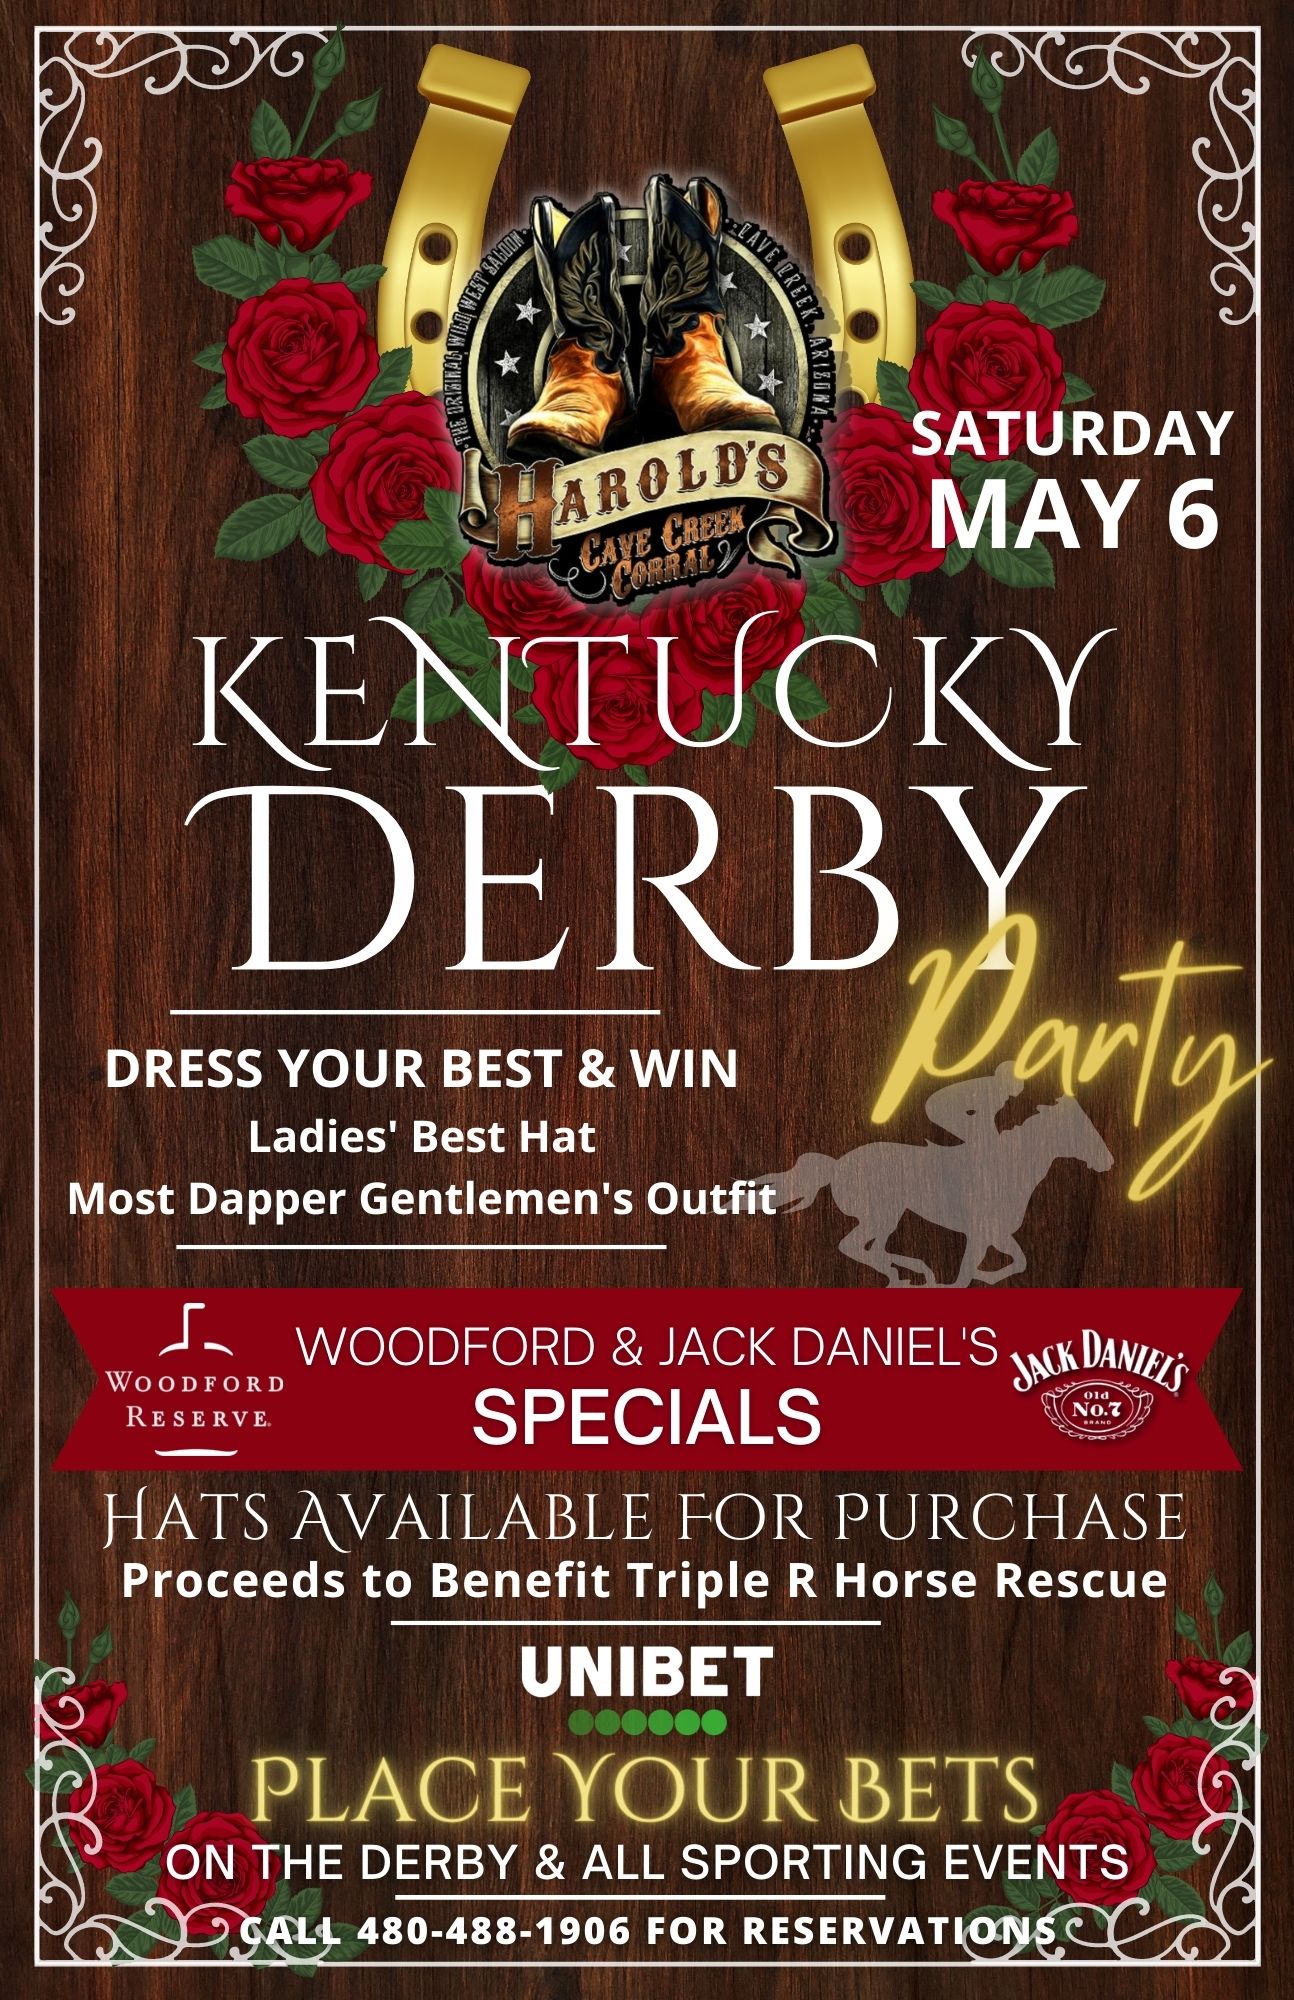 Kentucky Derby party at Harold's Corral - Harold's Cave Creek Corral